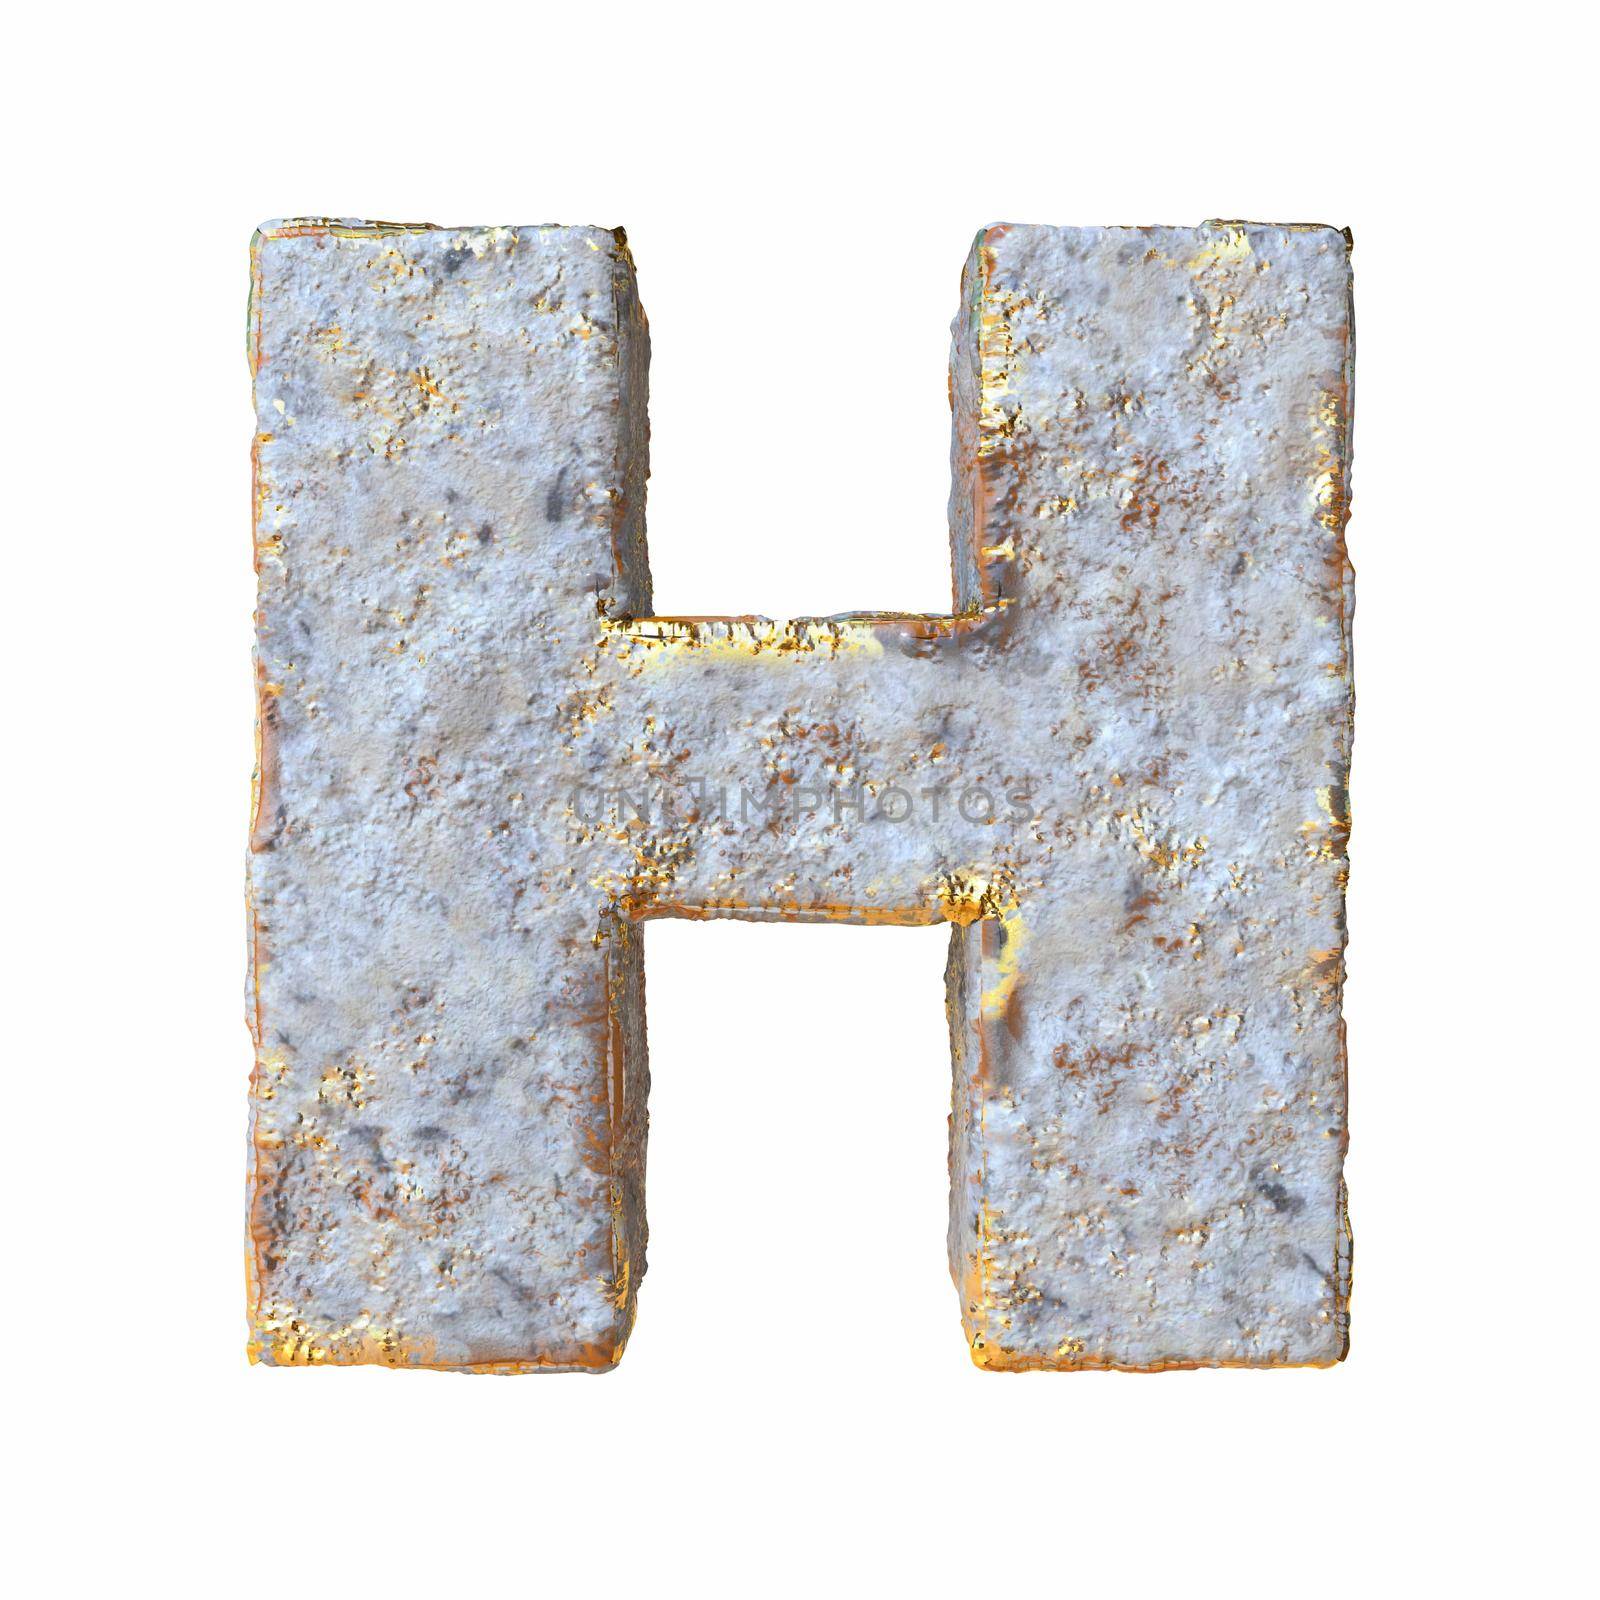 Stone with golden metal particles Letter H 3D rendering illustration isolated on white background